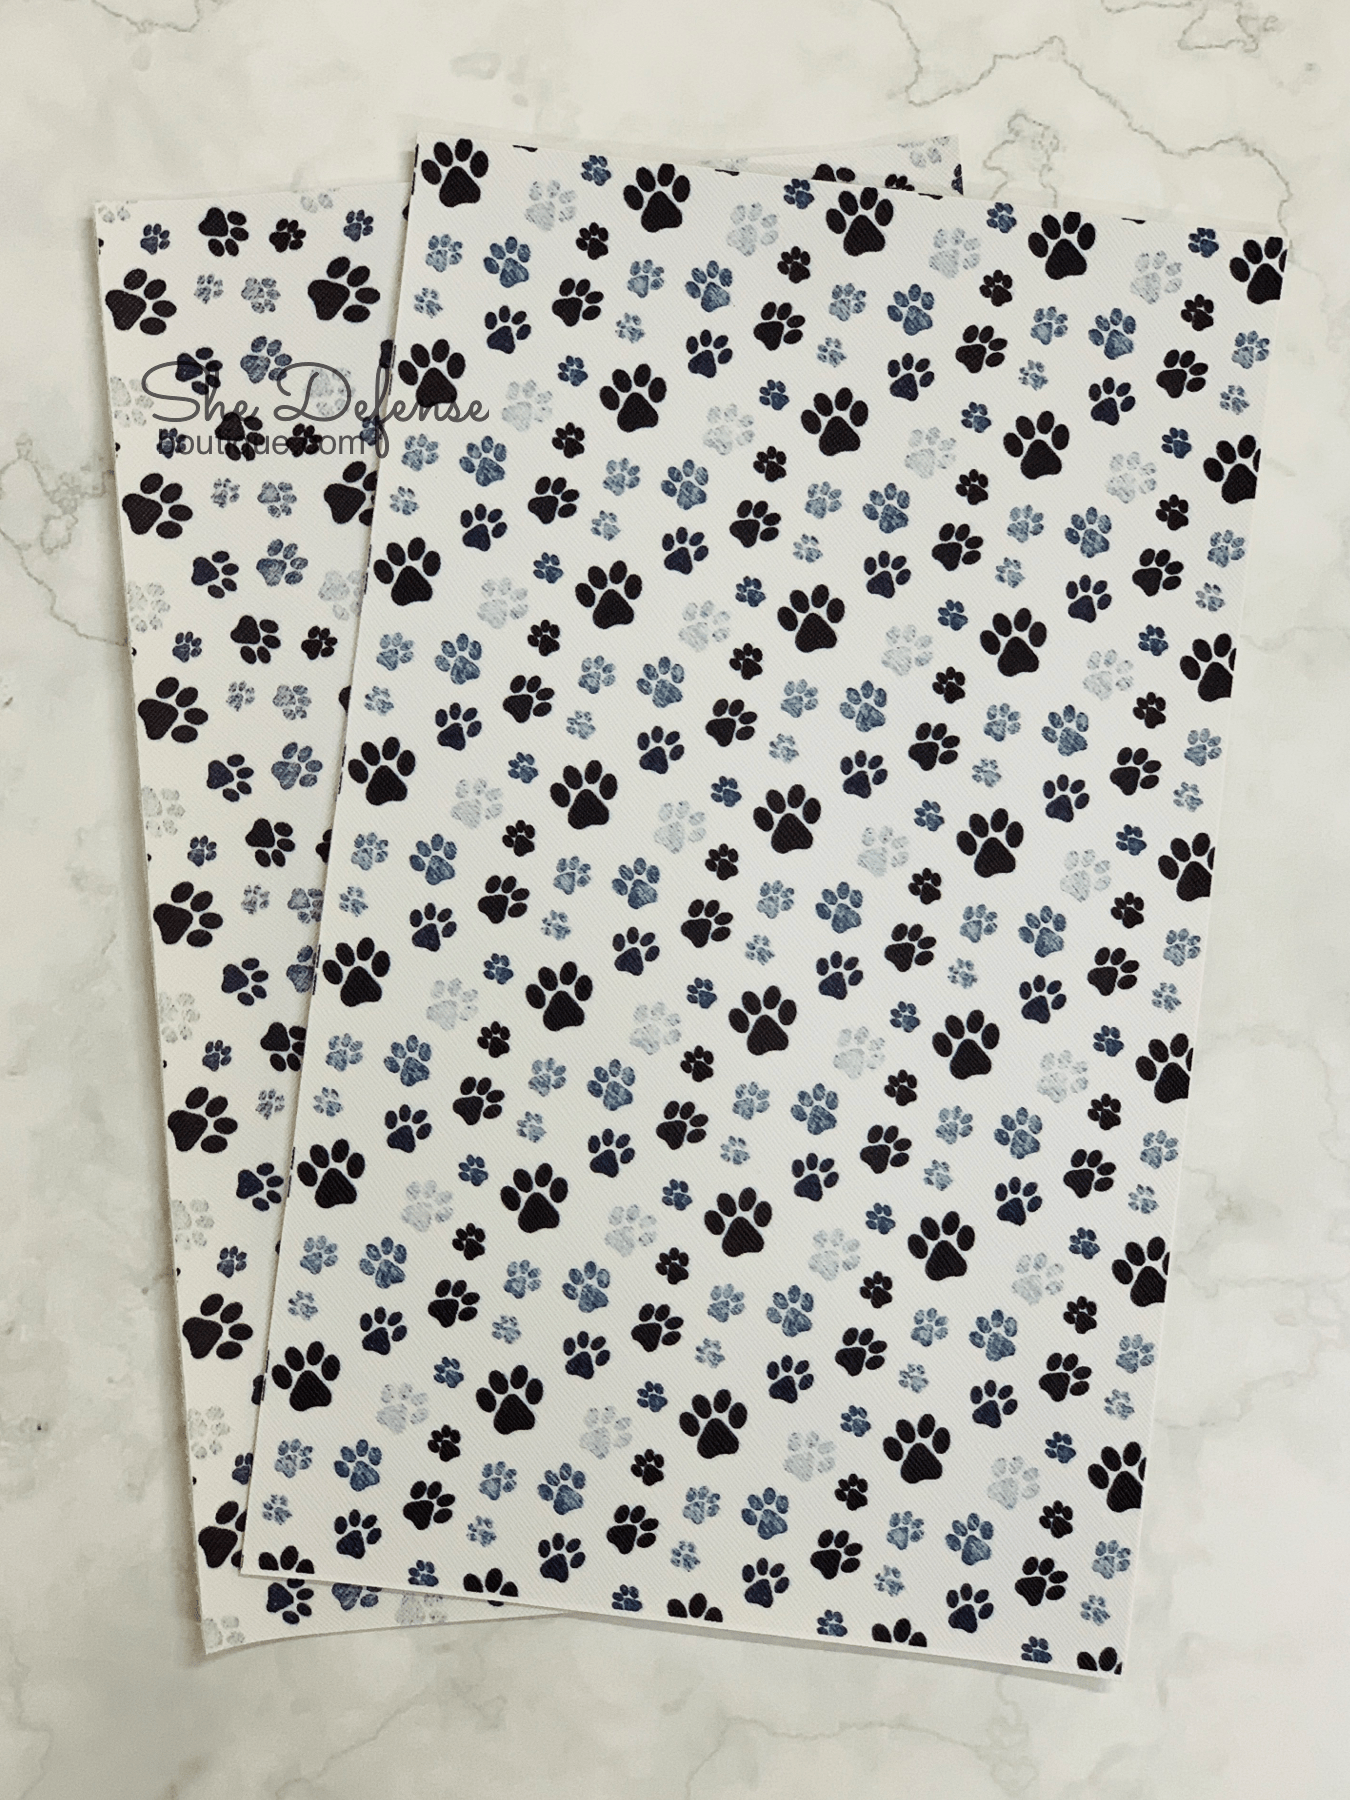 New 1pc Faux Leather Sheet F014,F060-F063 Dog Paws Print